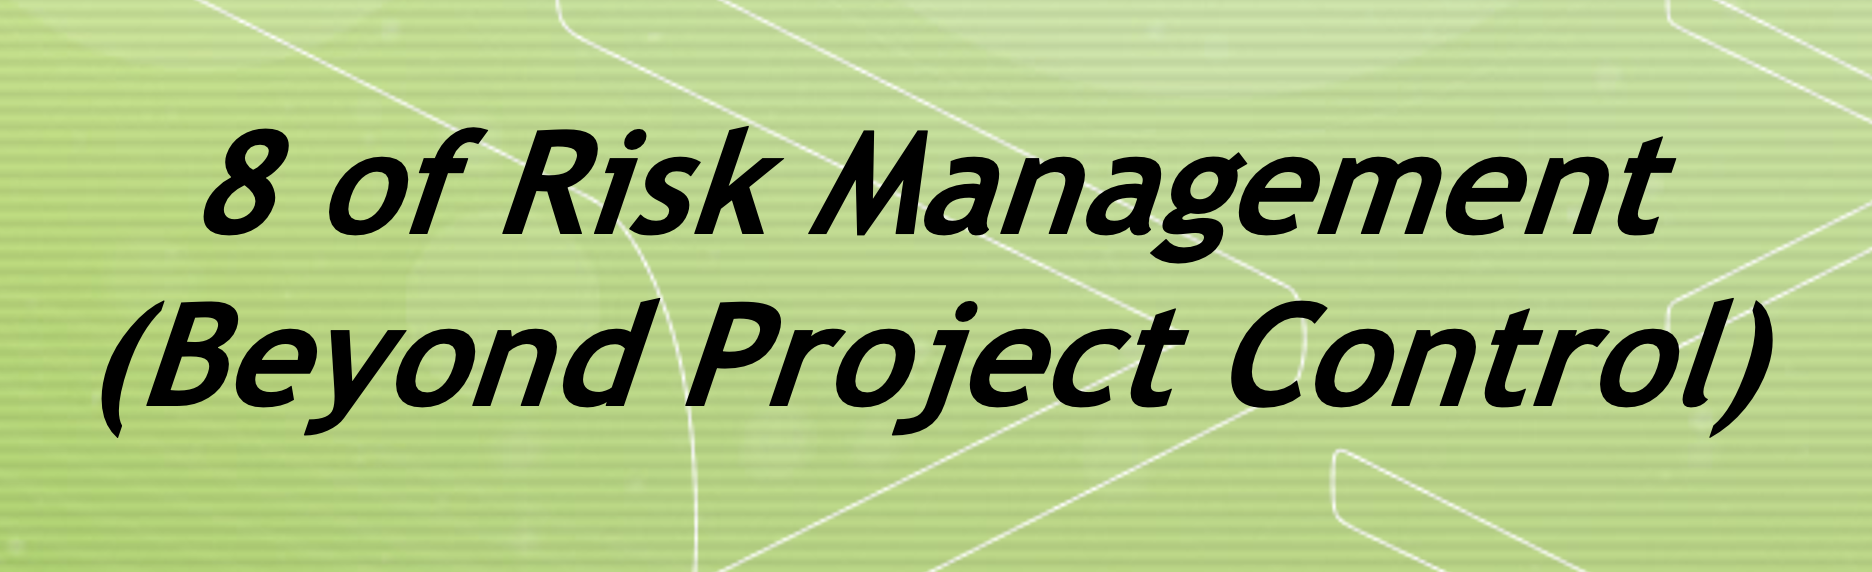 8 Benefits of Risk Management (Beyond Project Control)